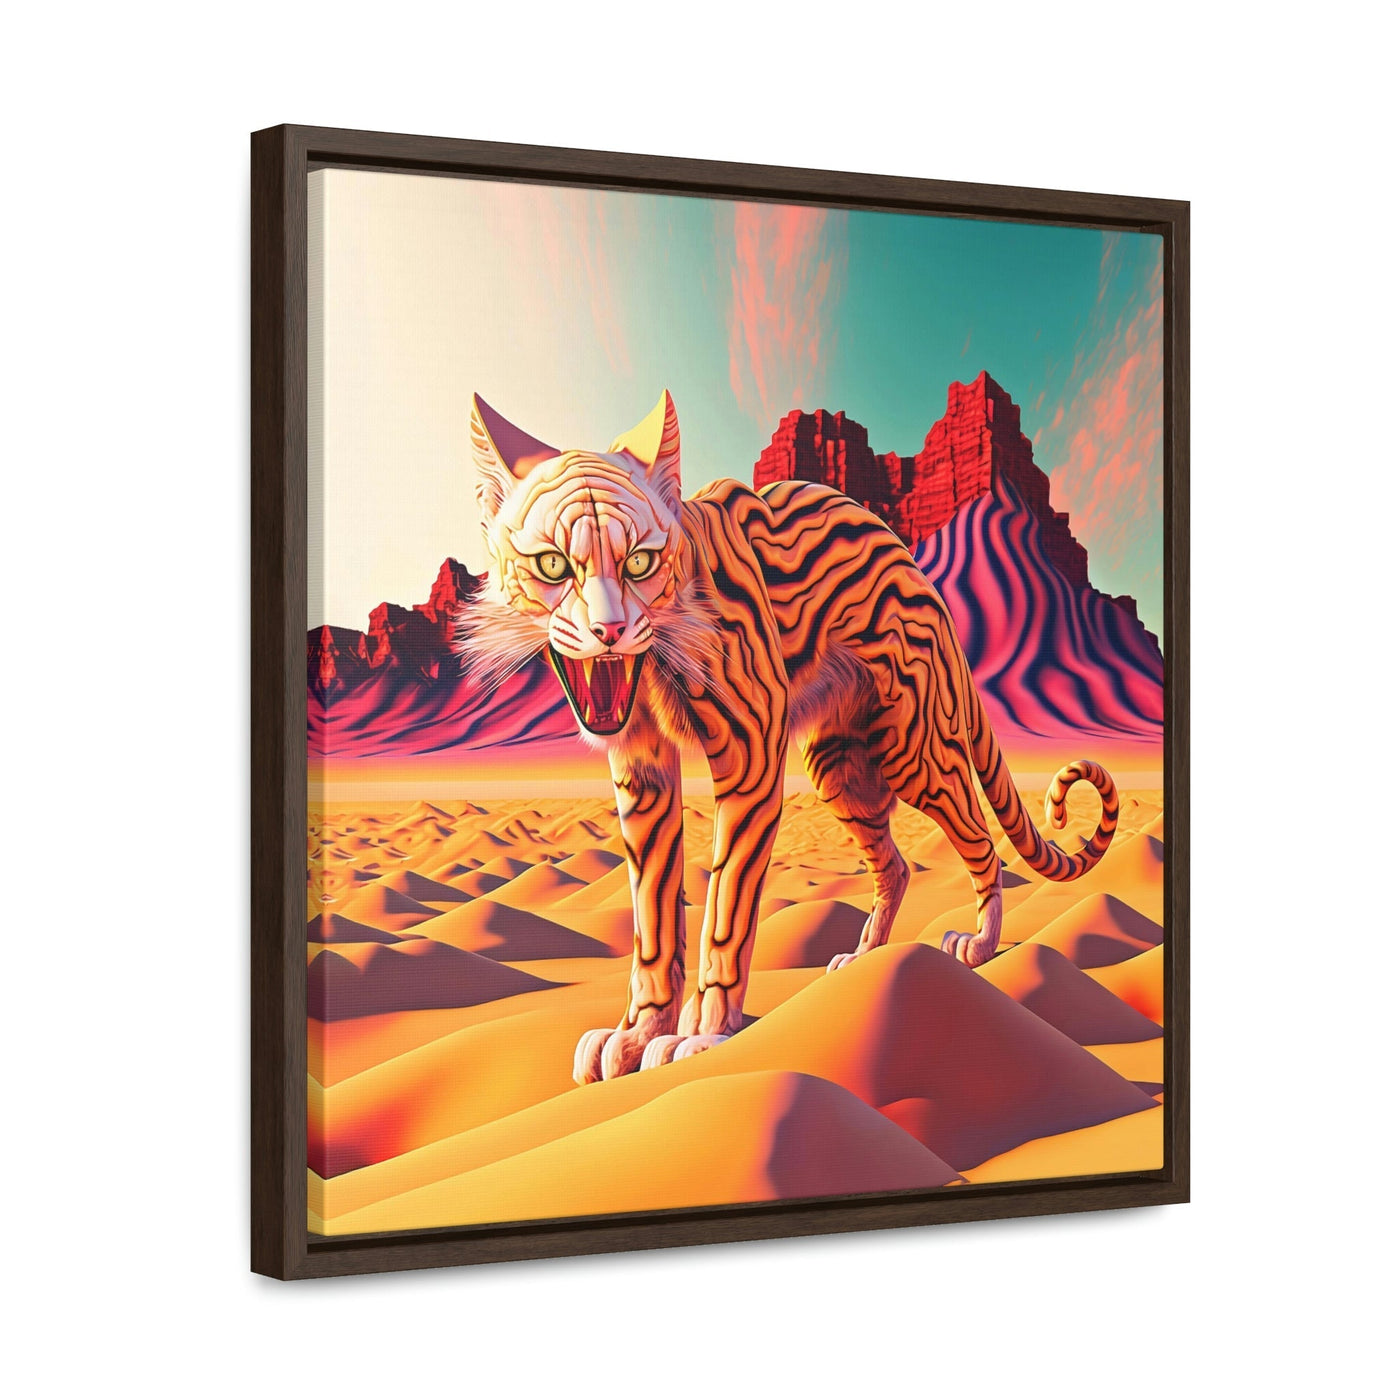 "Bengala Tiger Cat", Colourful Surreal Tiger Cat - Dreamy Landscape | Framed Wall Canvas